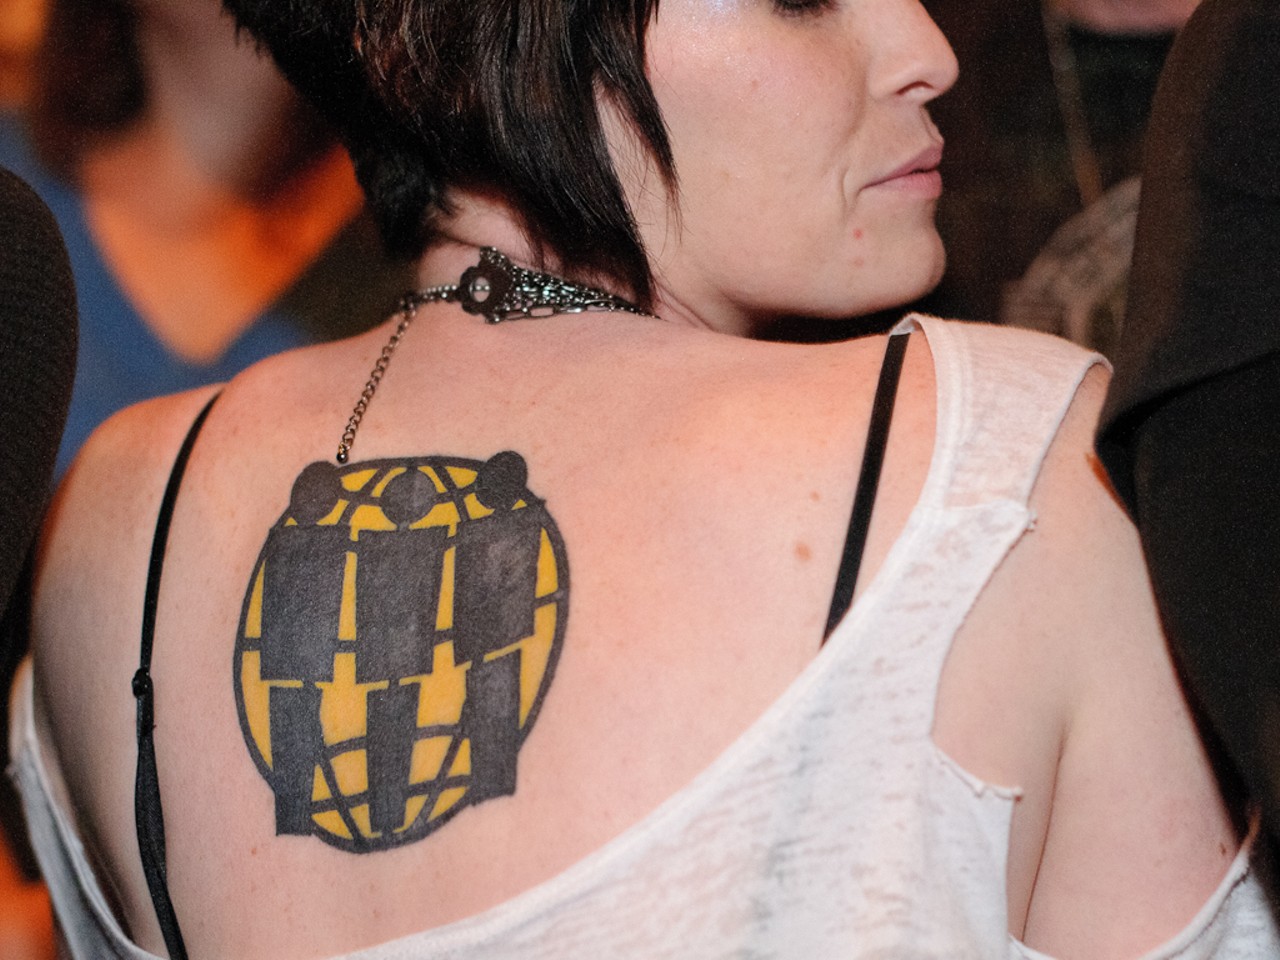 Britnee Liehr drove three hours from Mt. Sterling, Illinois to show off her Third Man Records tattoo - and enjoy the rock show, of course.